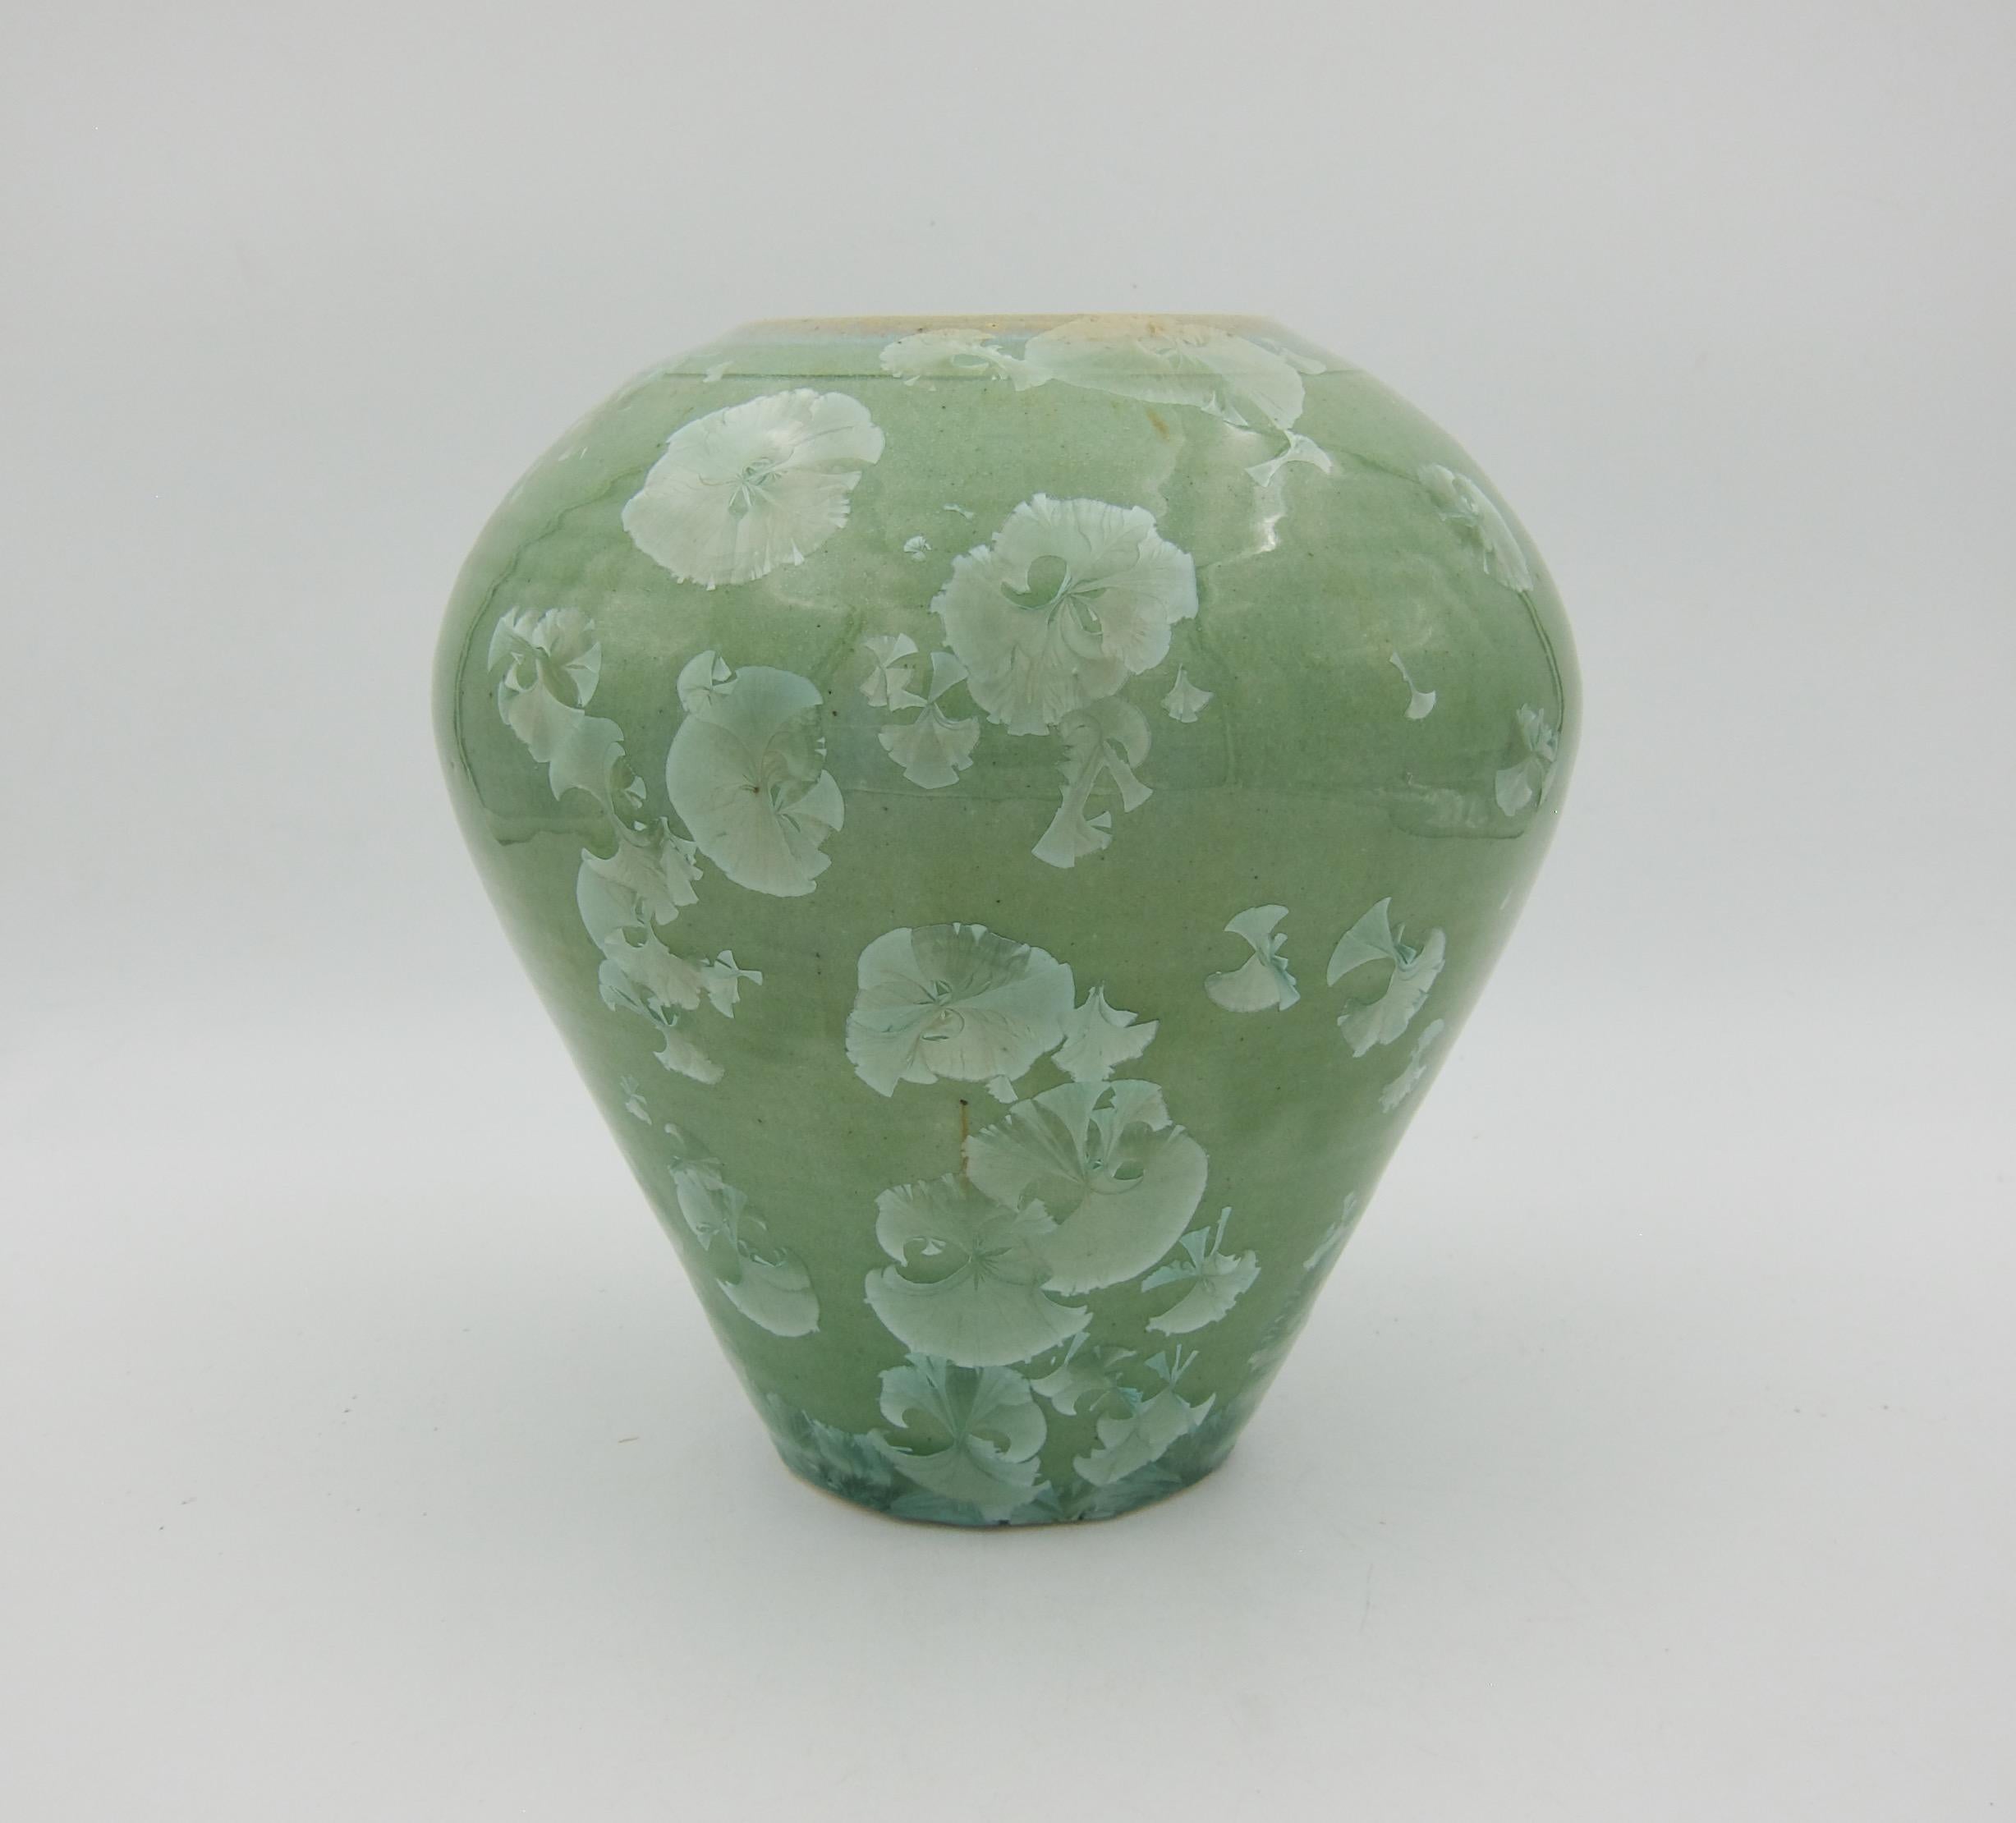 A hand-thrown vintage studio pottery vase from 1987 with a sophisticated crystalline glaze in shades of glossy celadon green with large, overlapping icy crystalline clusters, a few scattered accents in tan and brown. The American potter is Bill